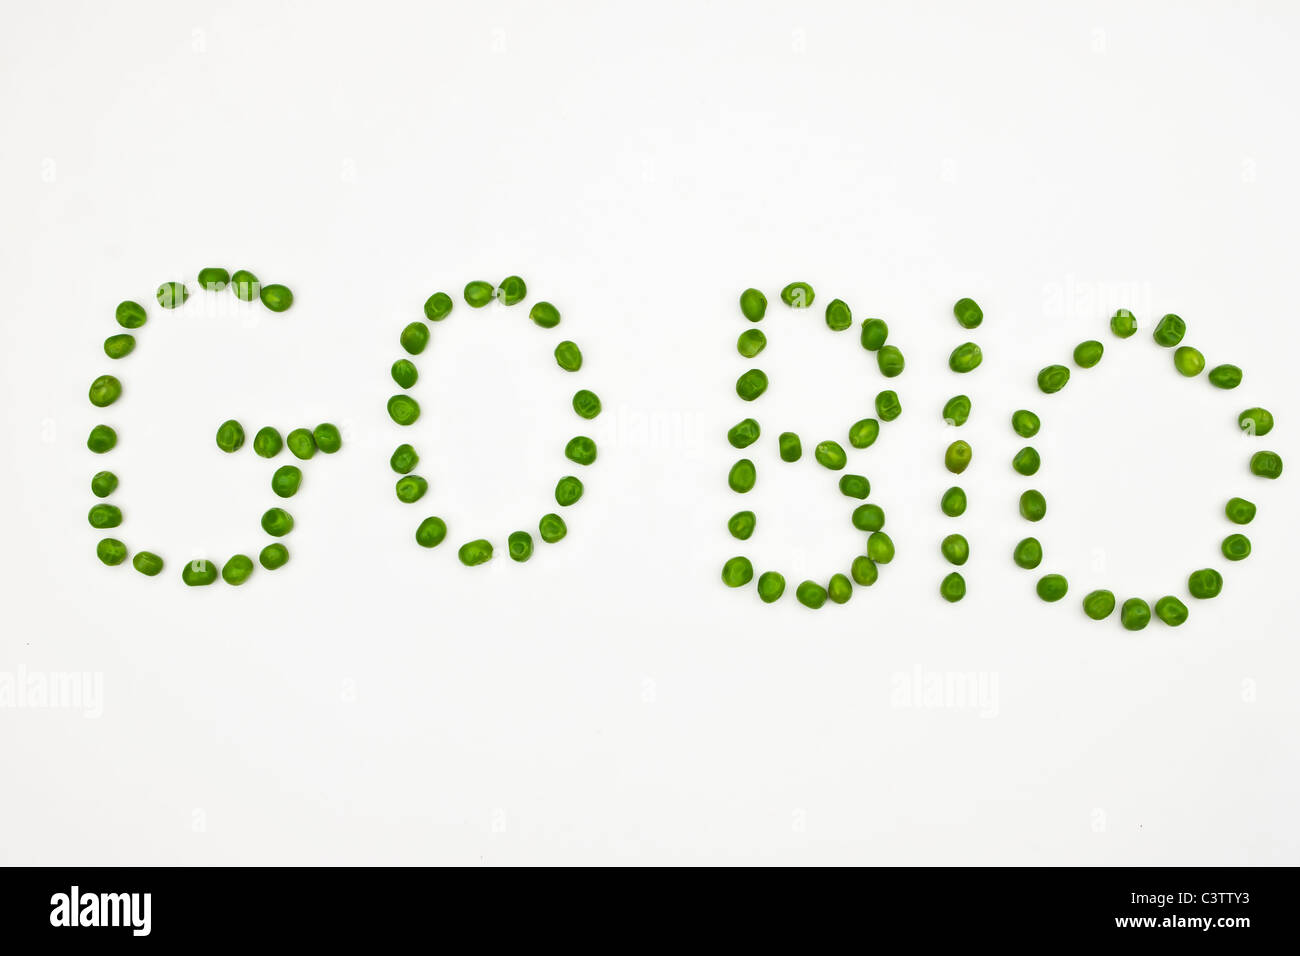 Image result for writing with peas